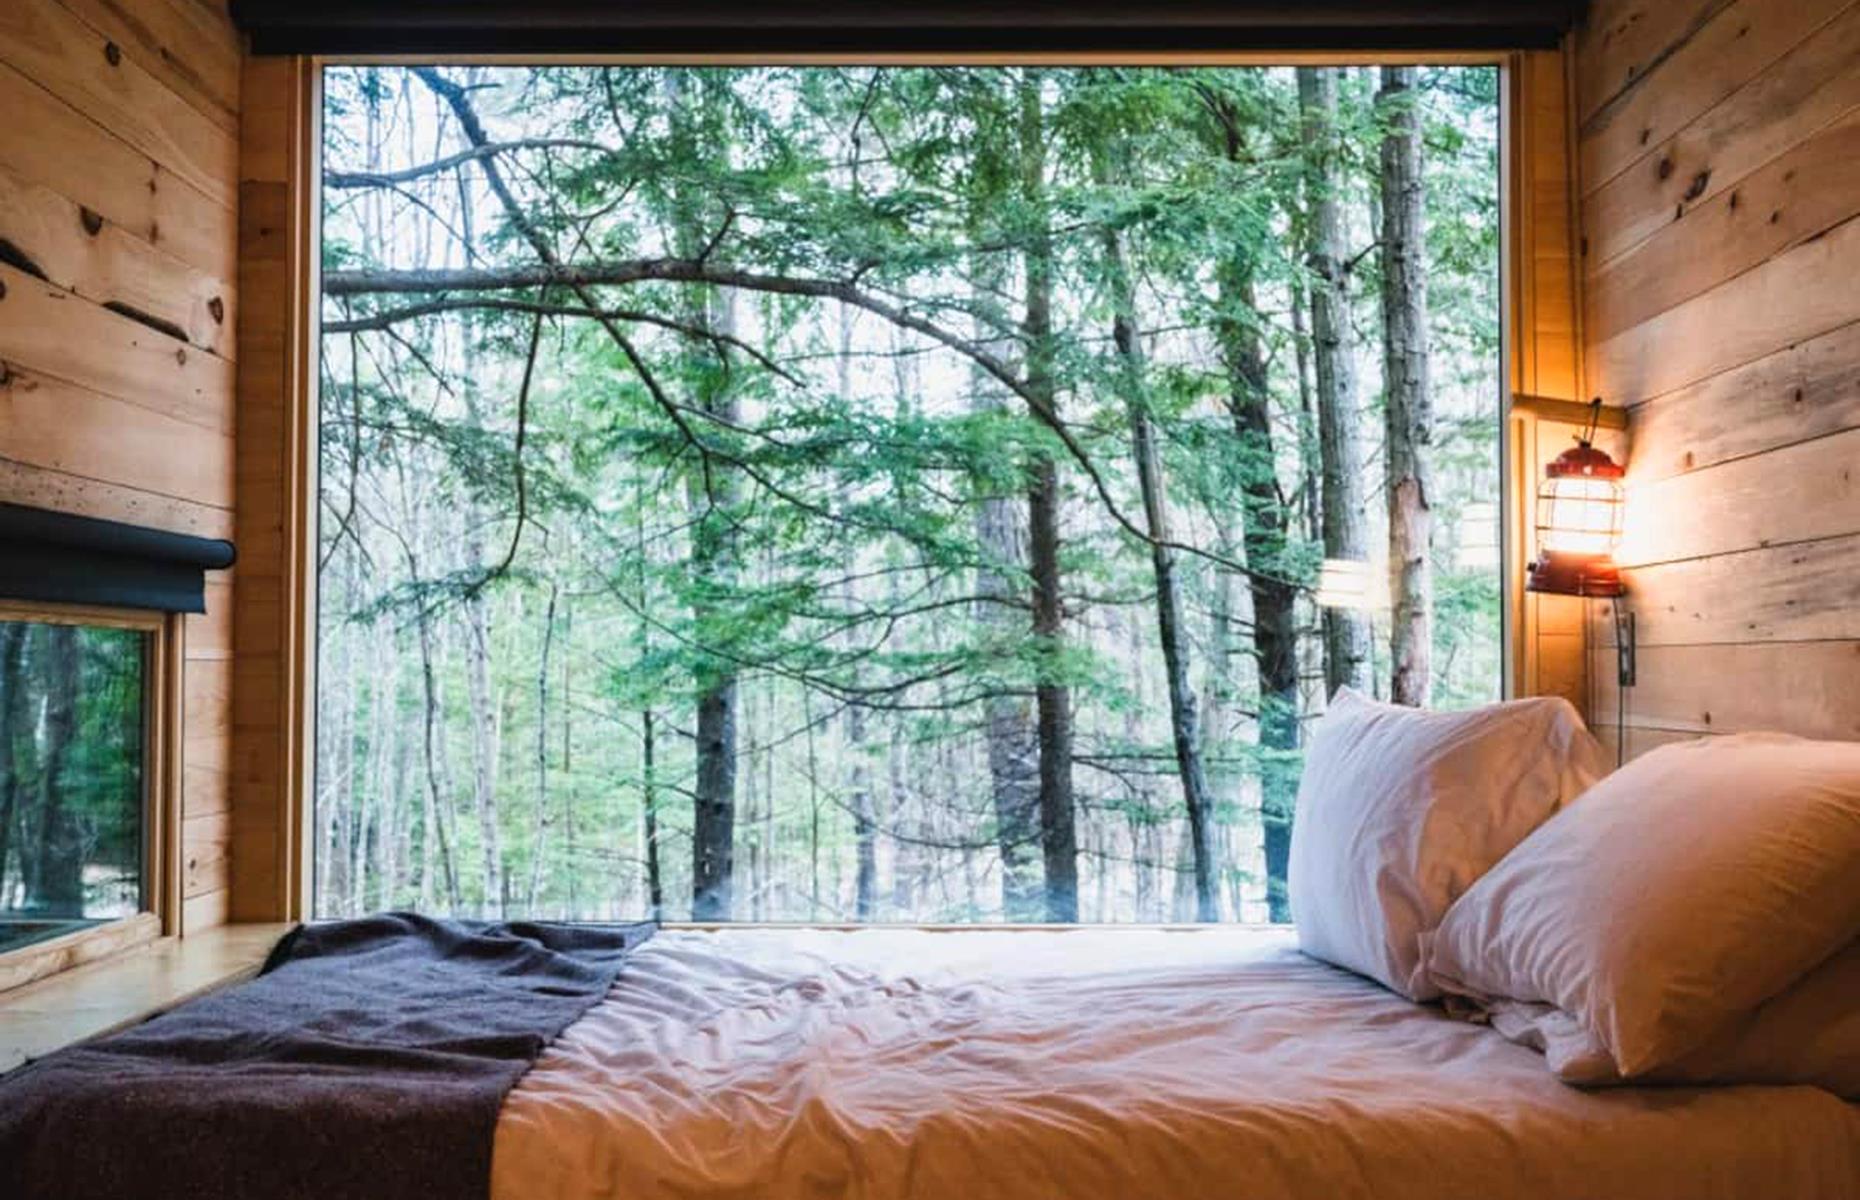 Revealed: The Highest Rated Airbnb In Your State